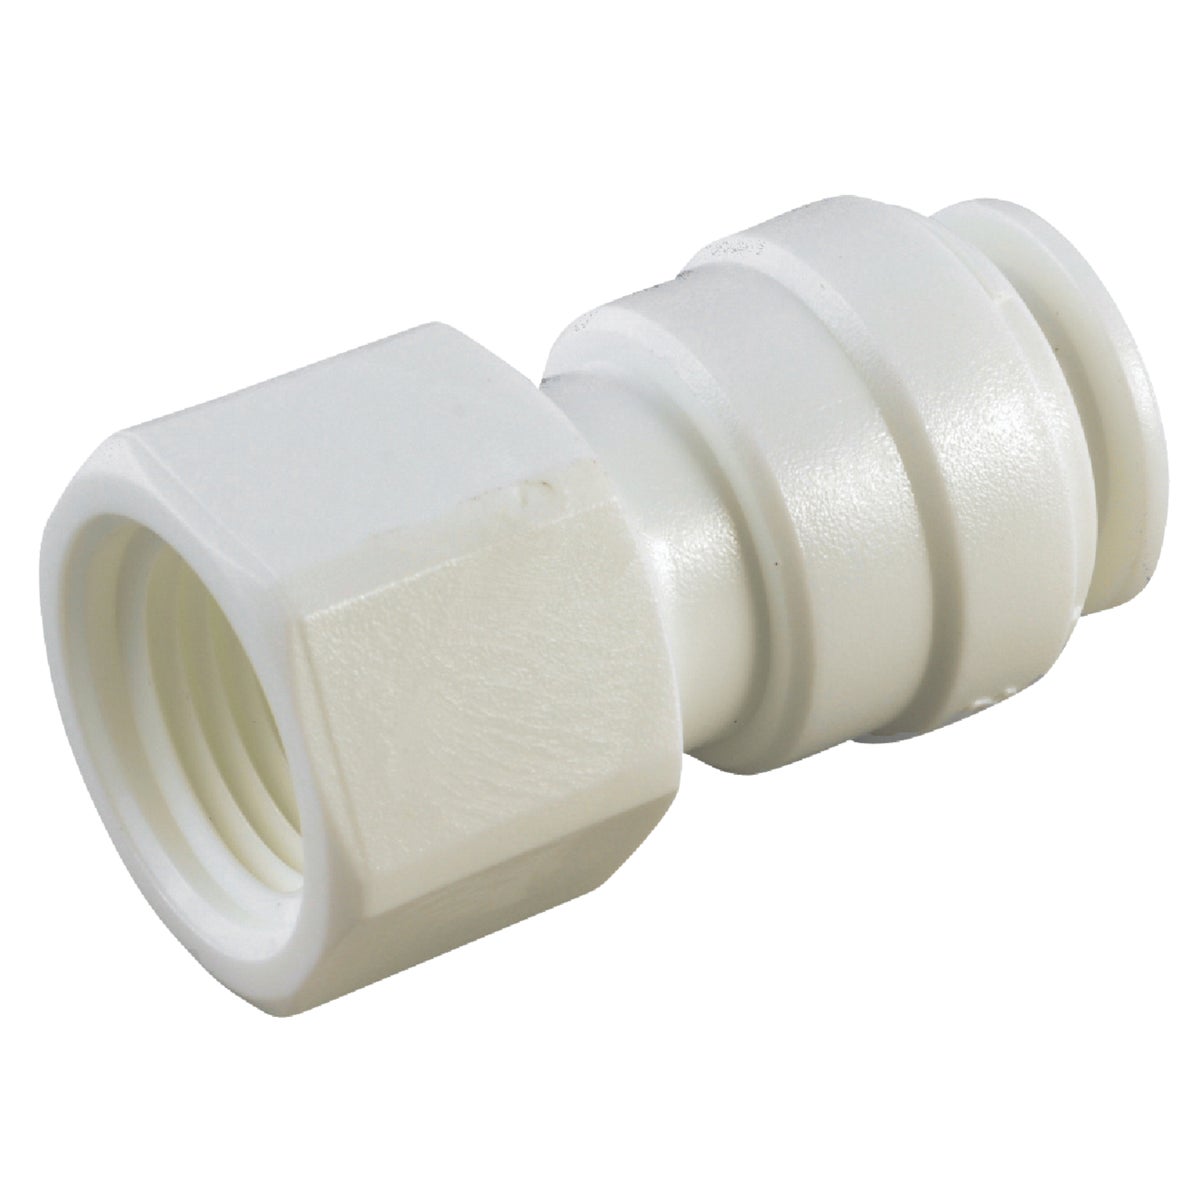 Anderson Metals 5/8 In. x 1/2 In. FPT Push-In Plastic Connector